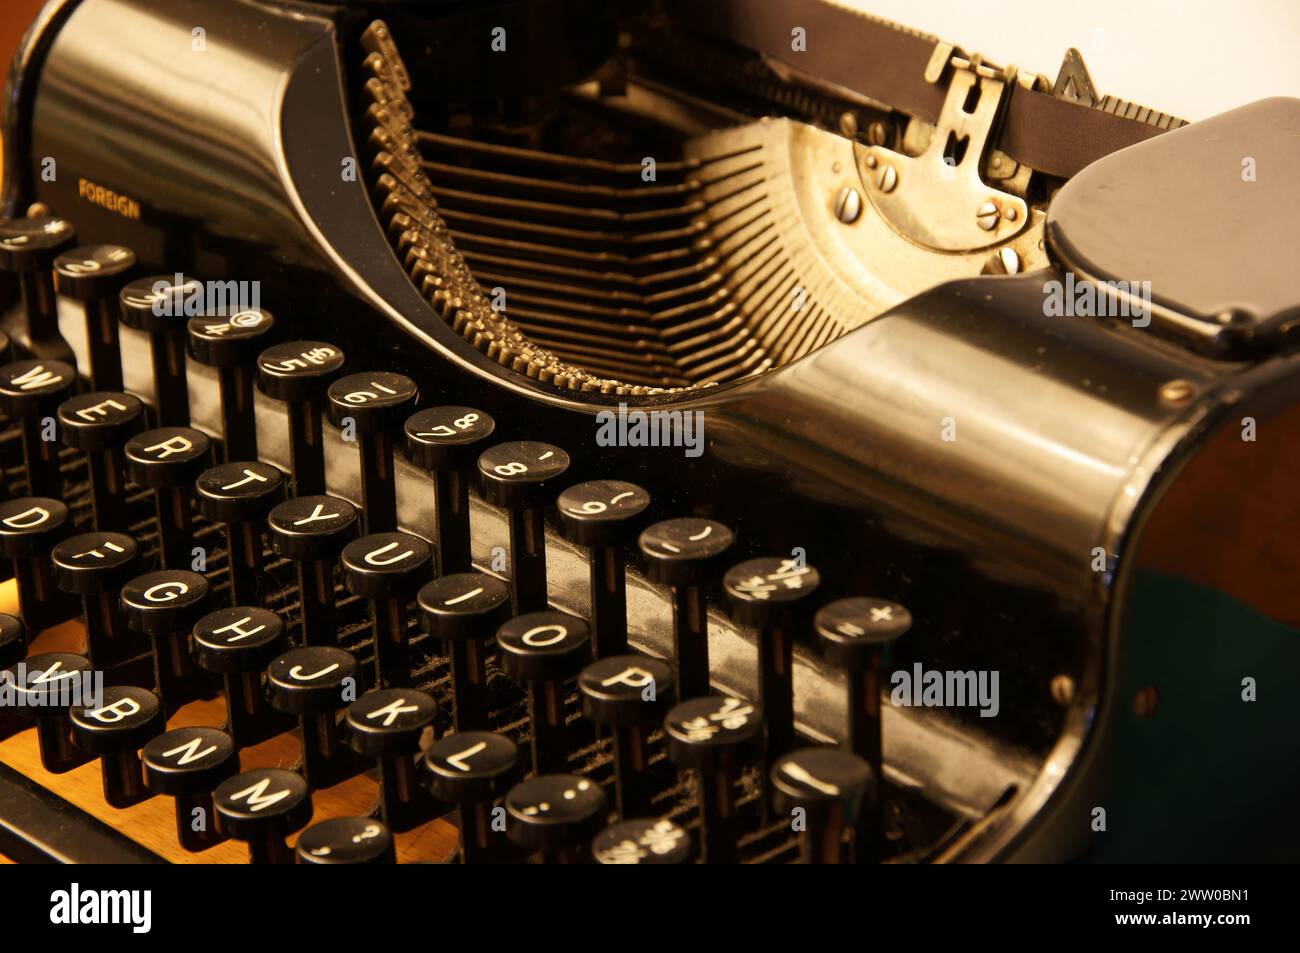 Graphic art and photography for writers of a retro typewriter, vintage coffee pots, tea pots and tea cups. Stock Photo